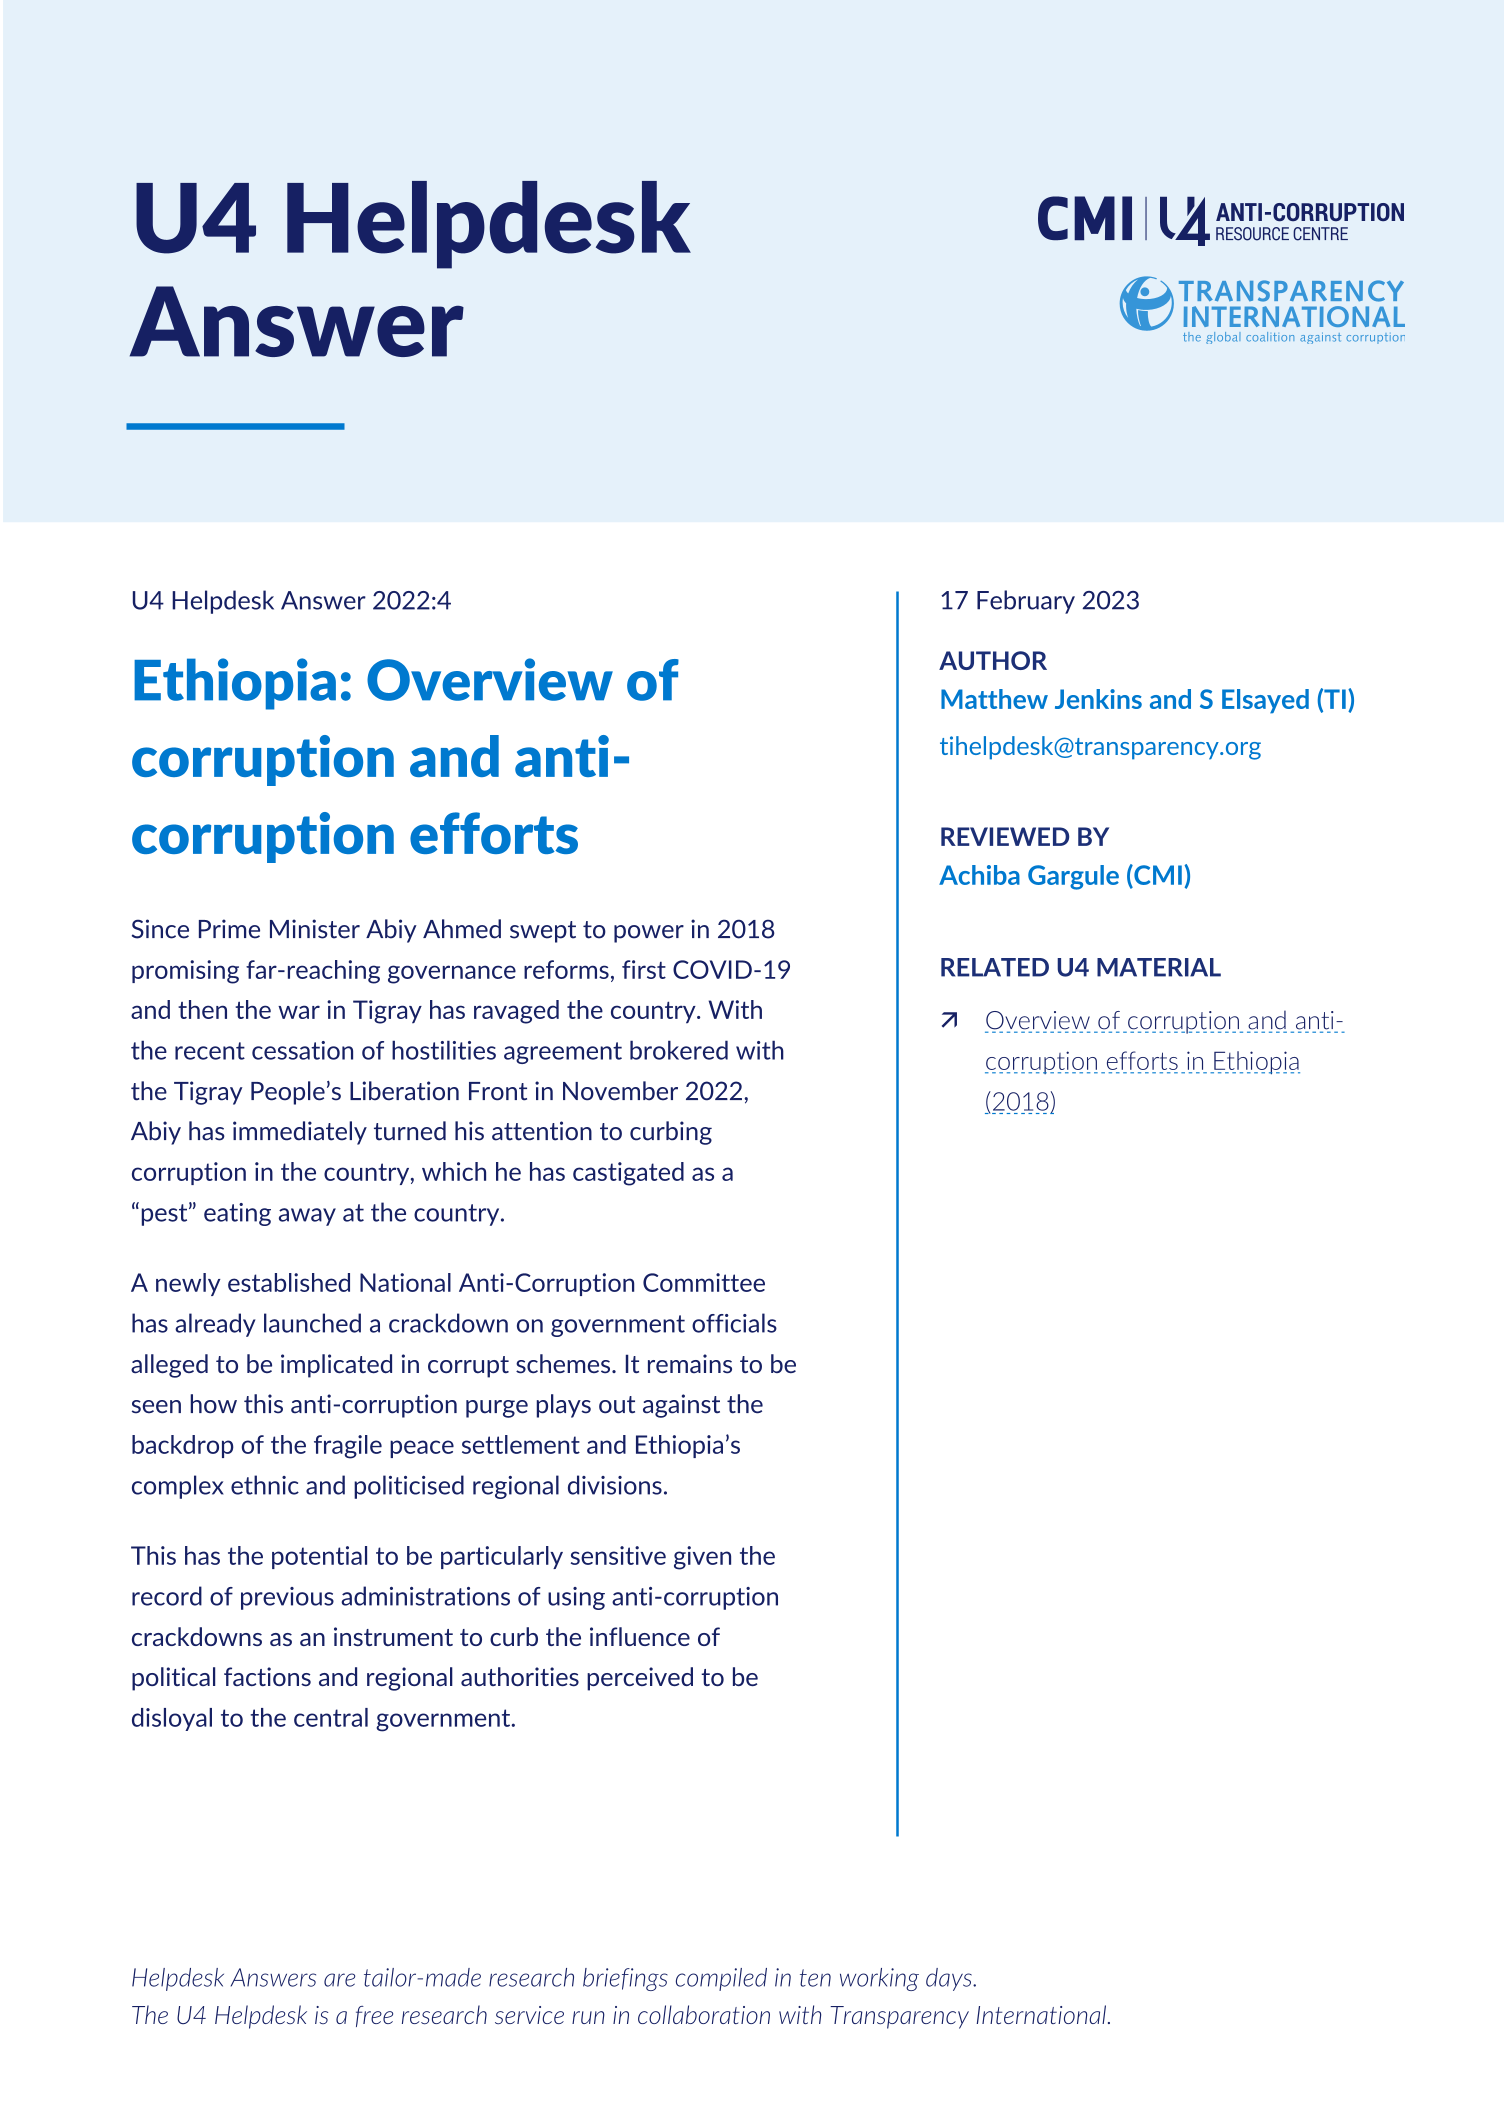 Ethiopia: Overview of corruption and anti-corruption efforts